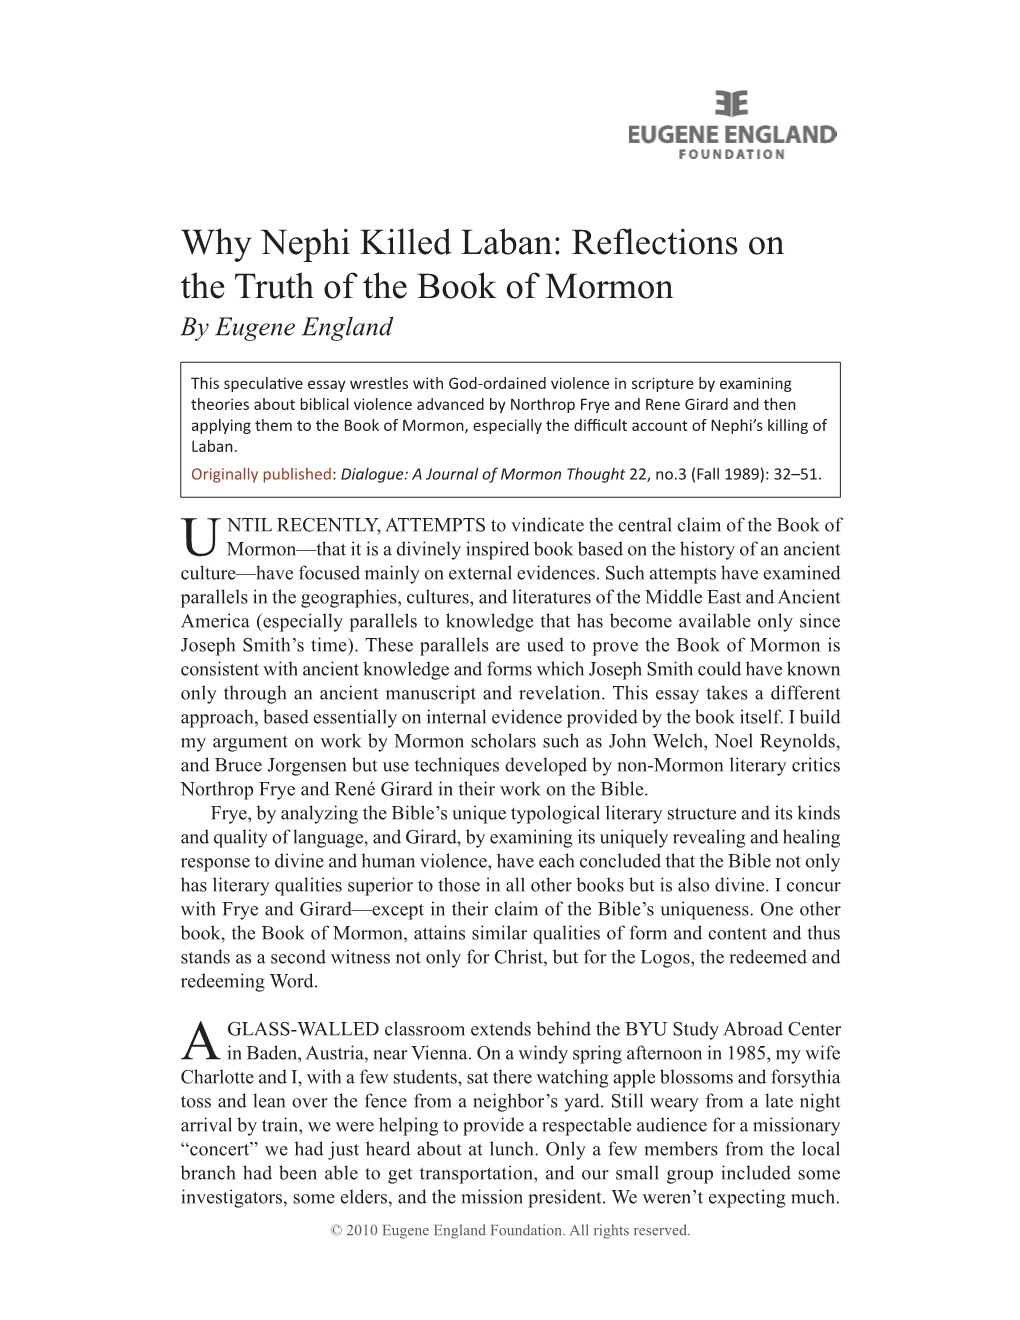 Why Nephi Killed Laban: Reflections on the Truth of the Book of Mormon